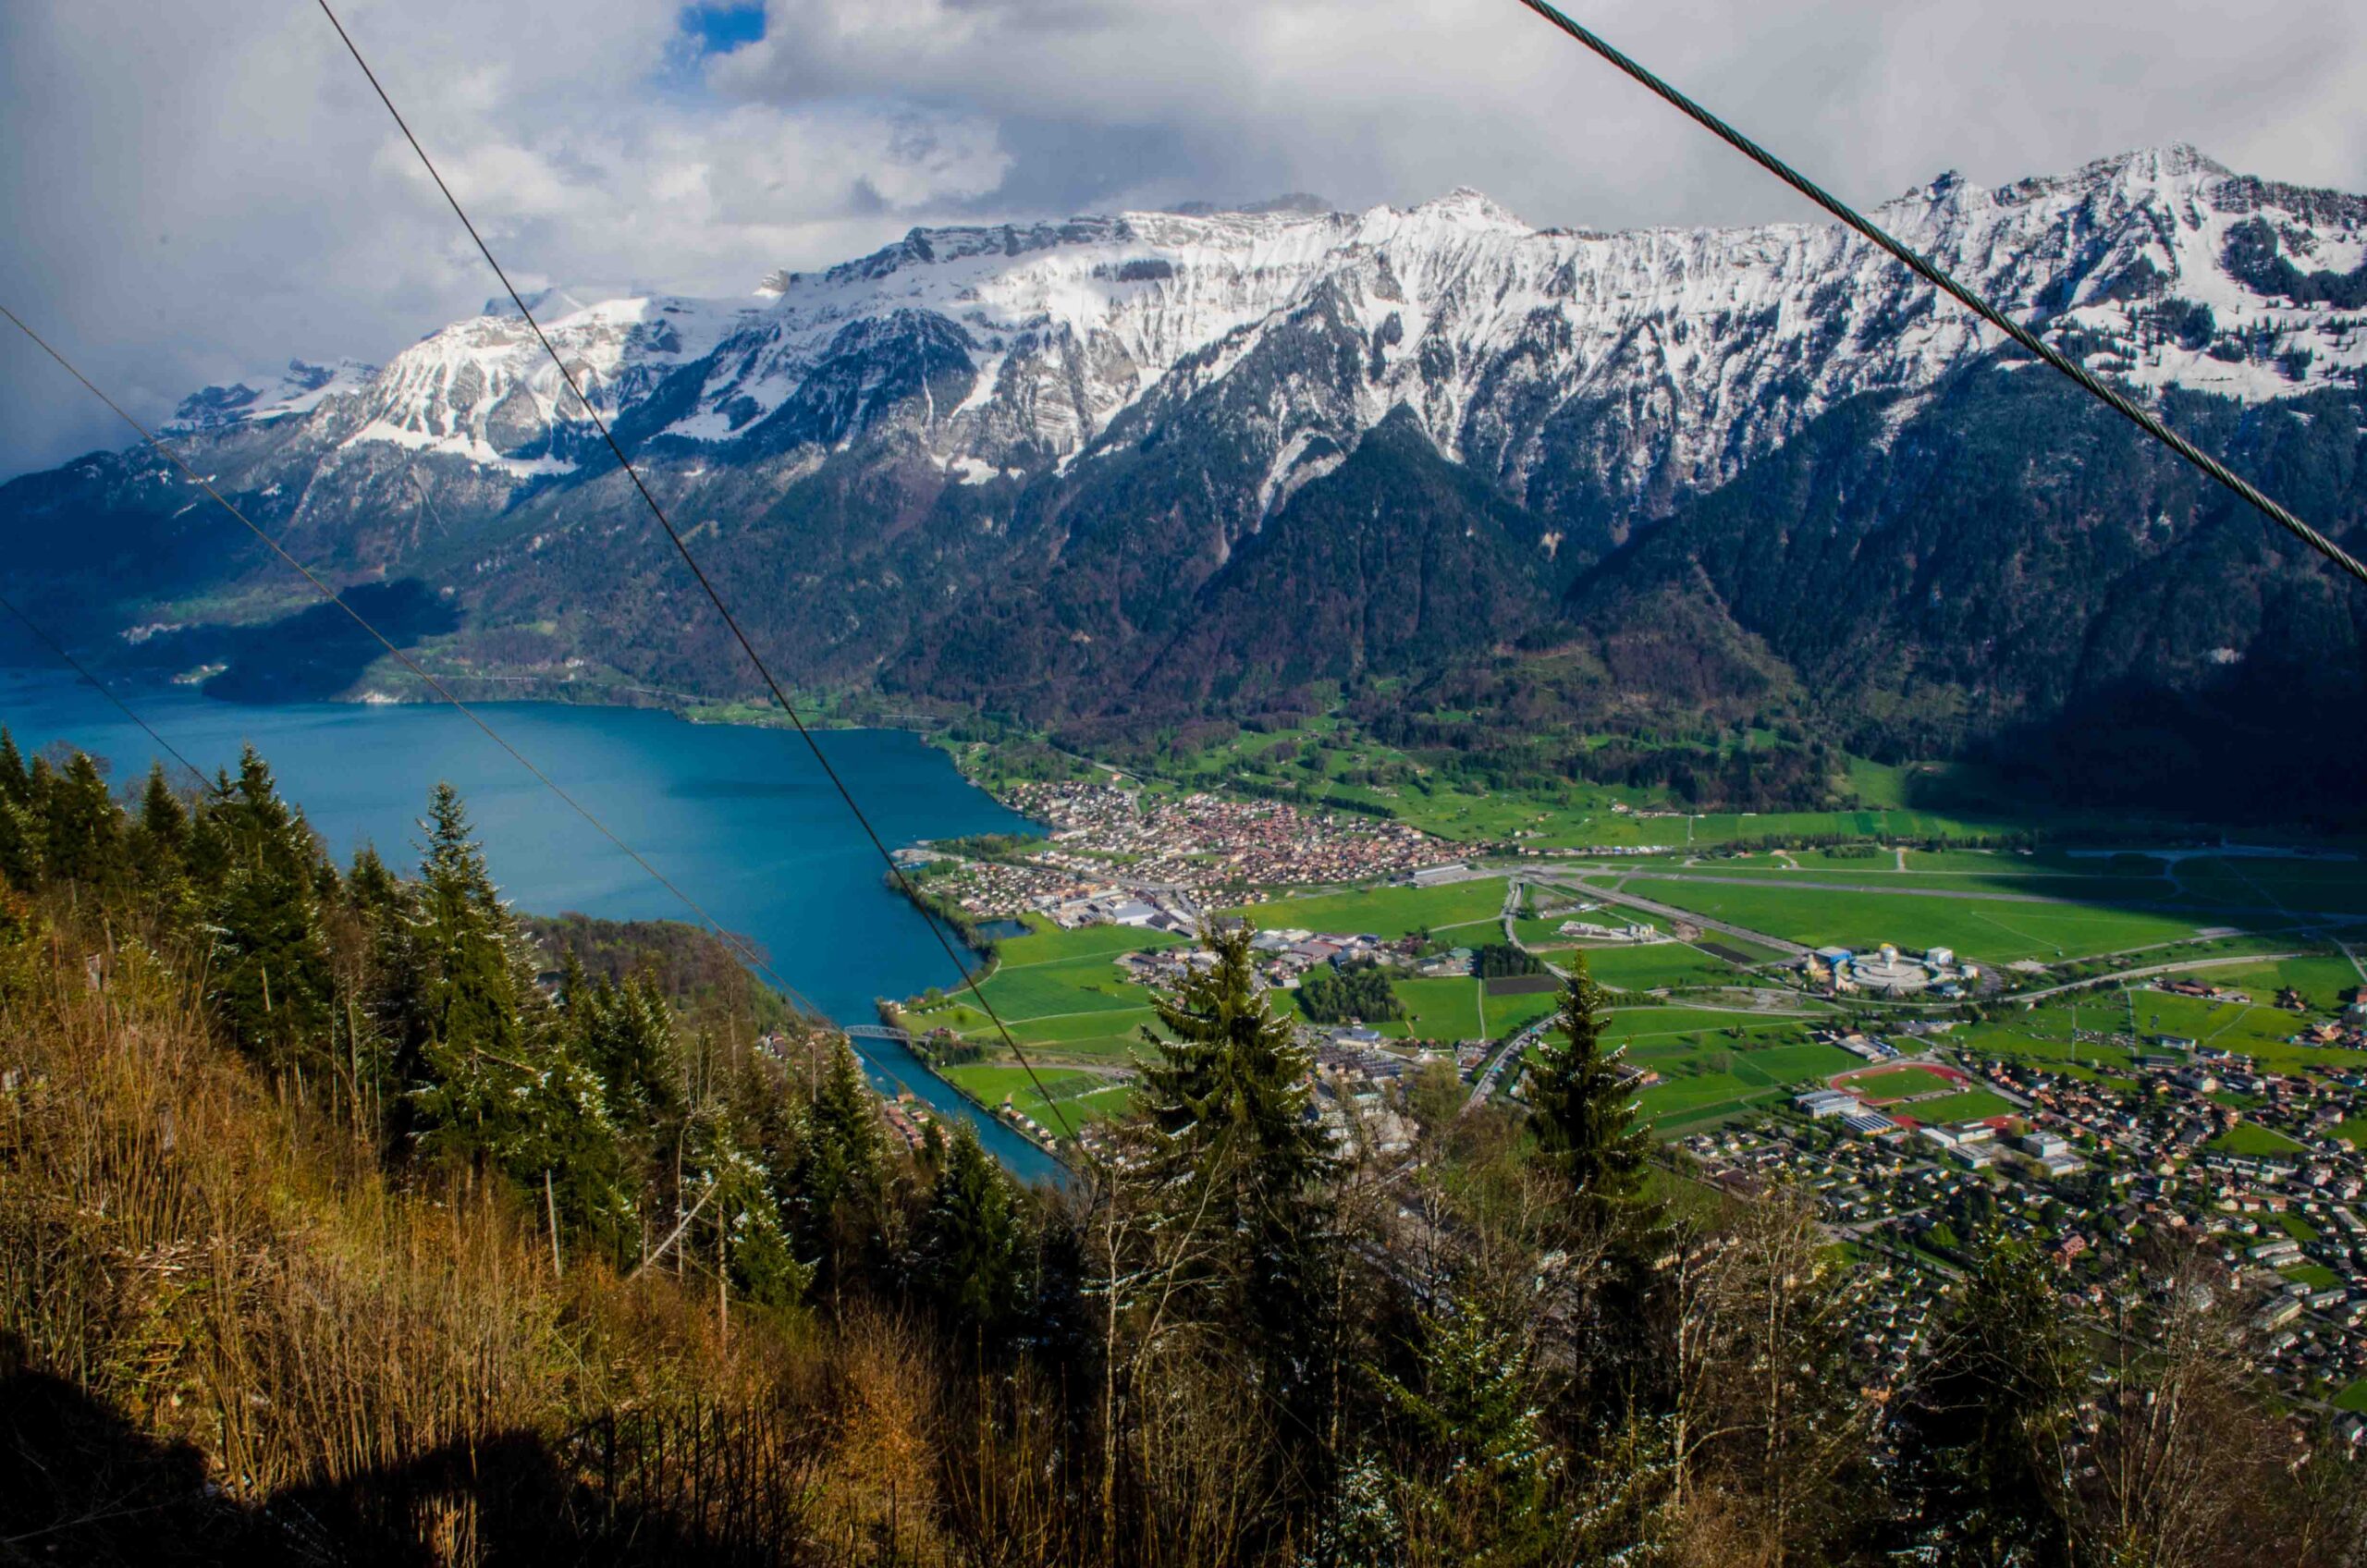 Interlaken, the Swiss city at the base of the Alps